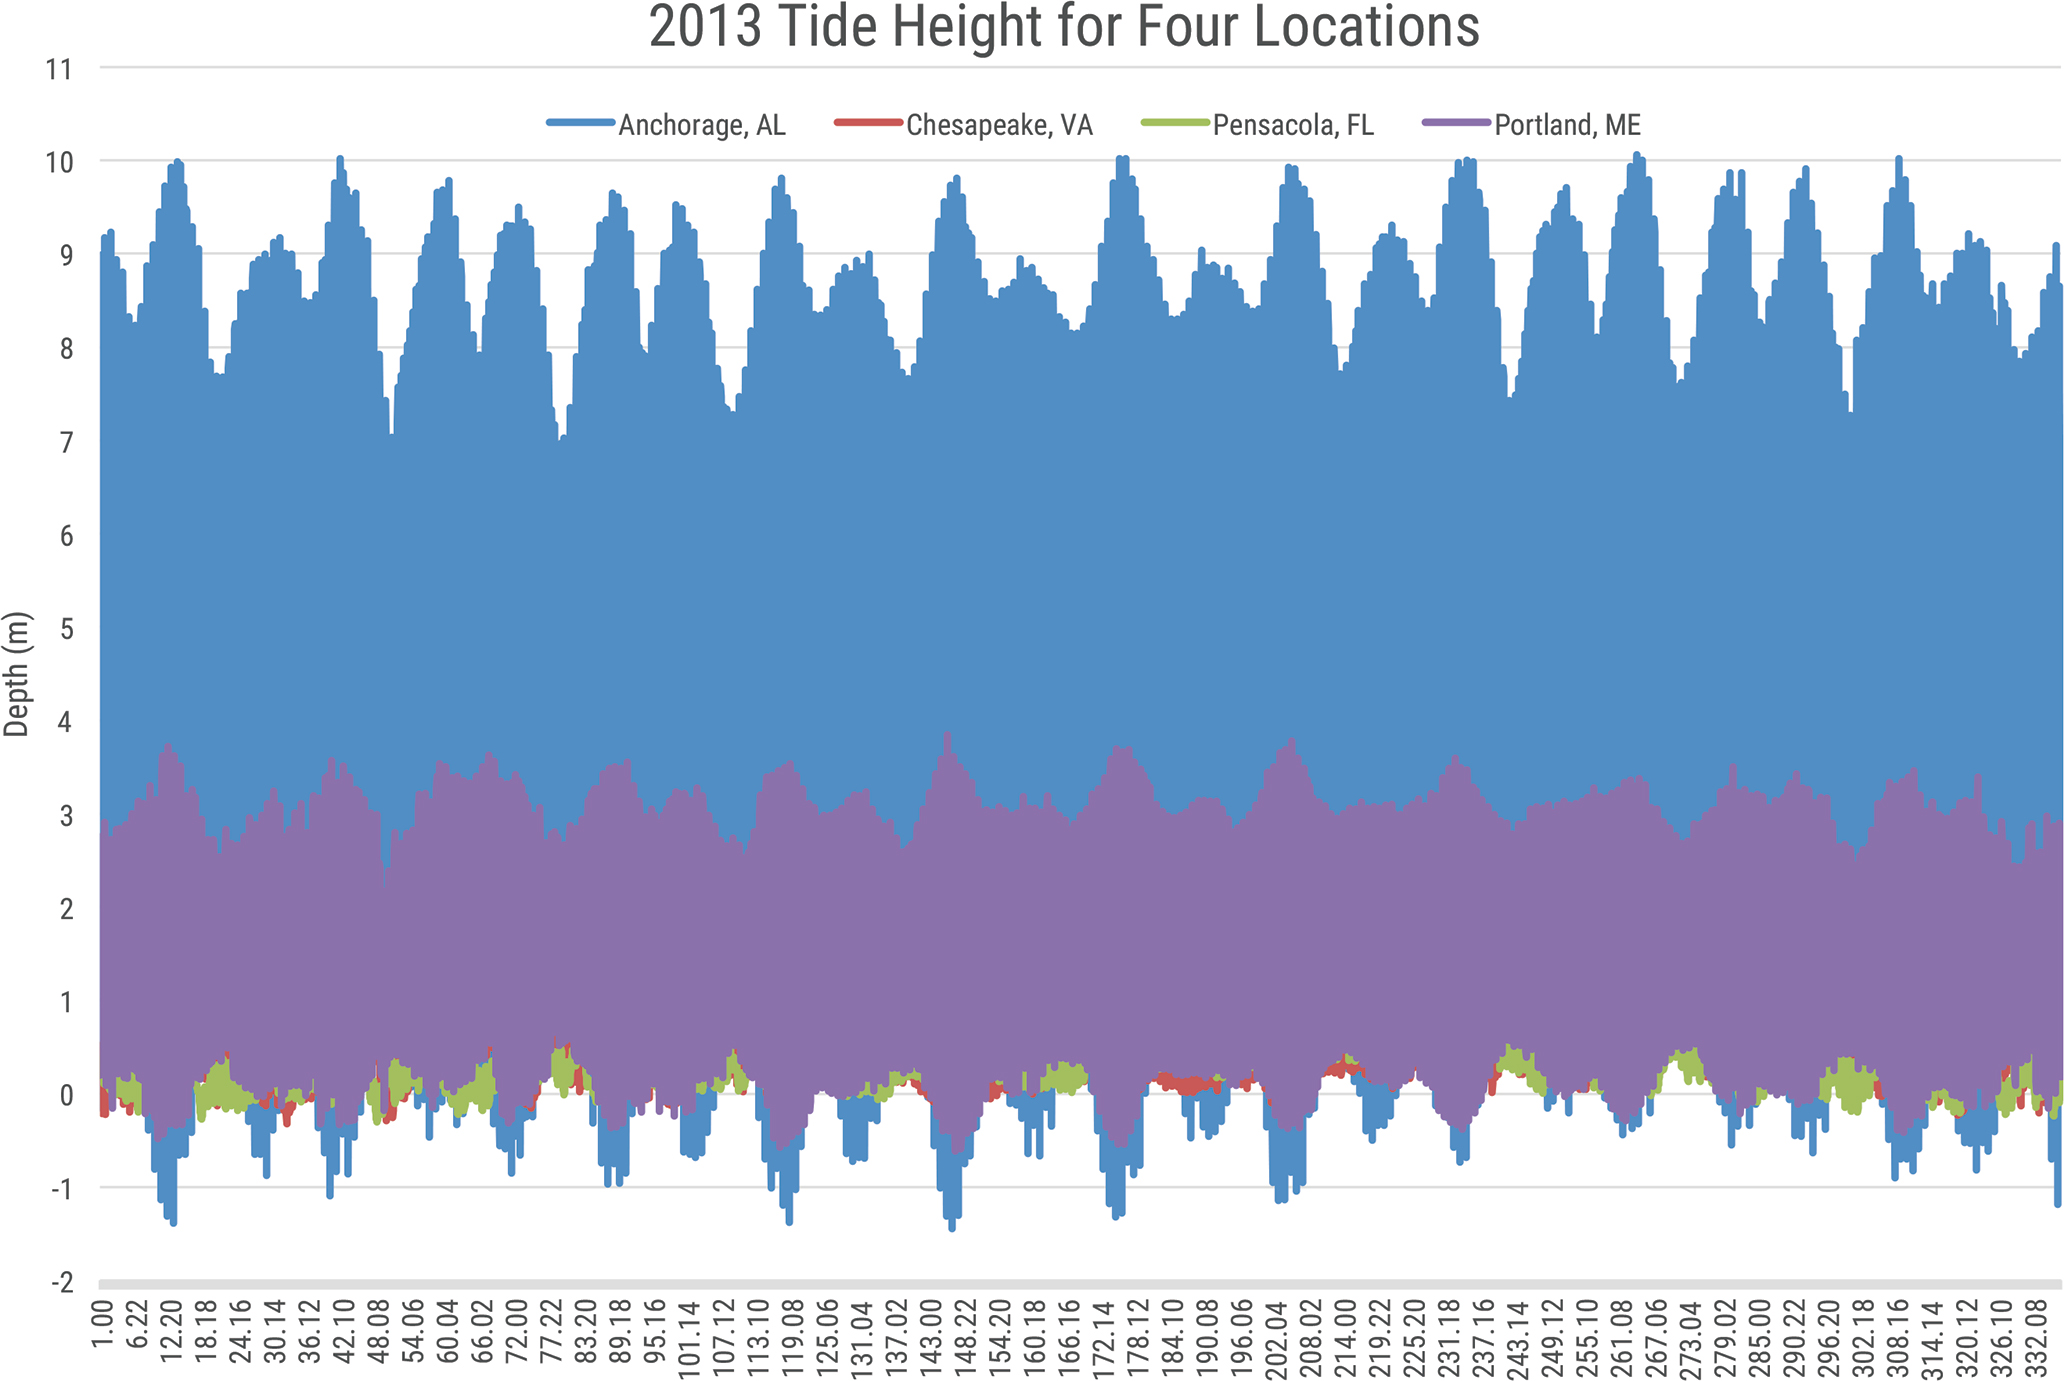 Plot of tide height from NOAA website for four locations at the time interval once an hour over 332 days. This plot demonstrates when too much data collection can prohibit pattern recognition